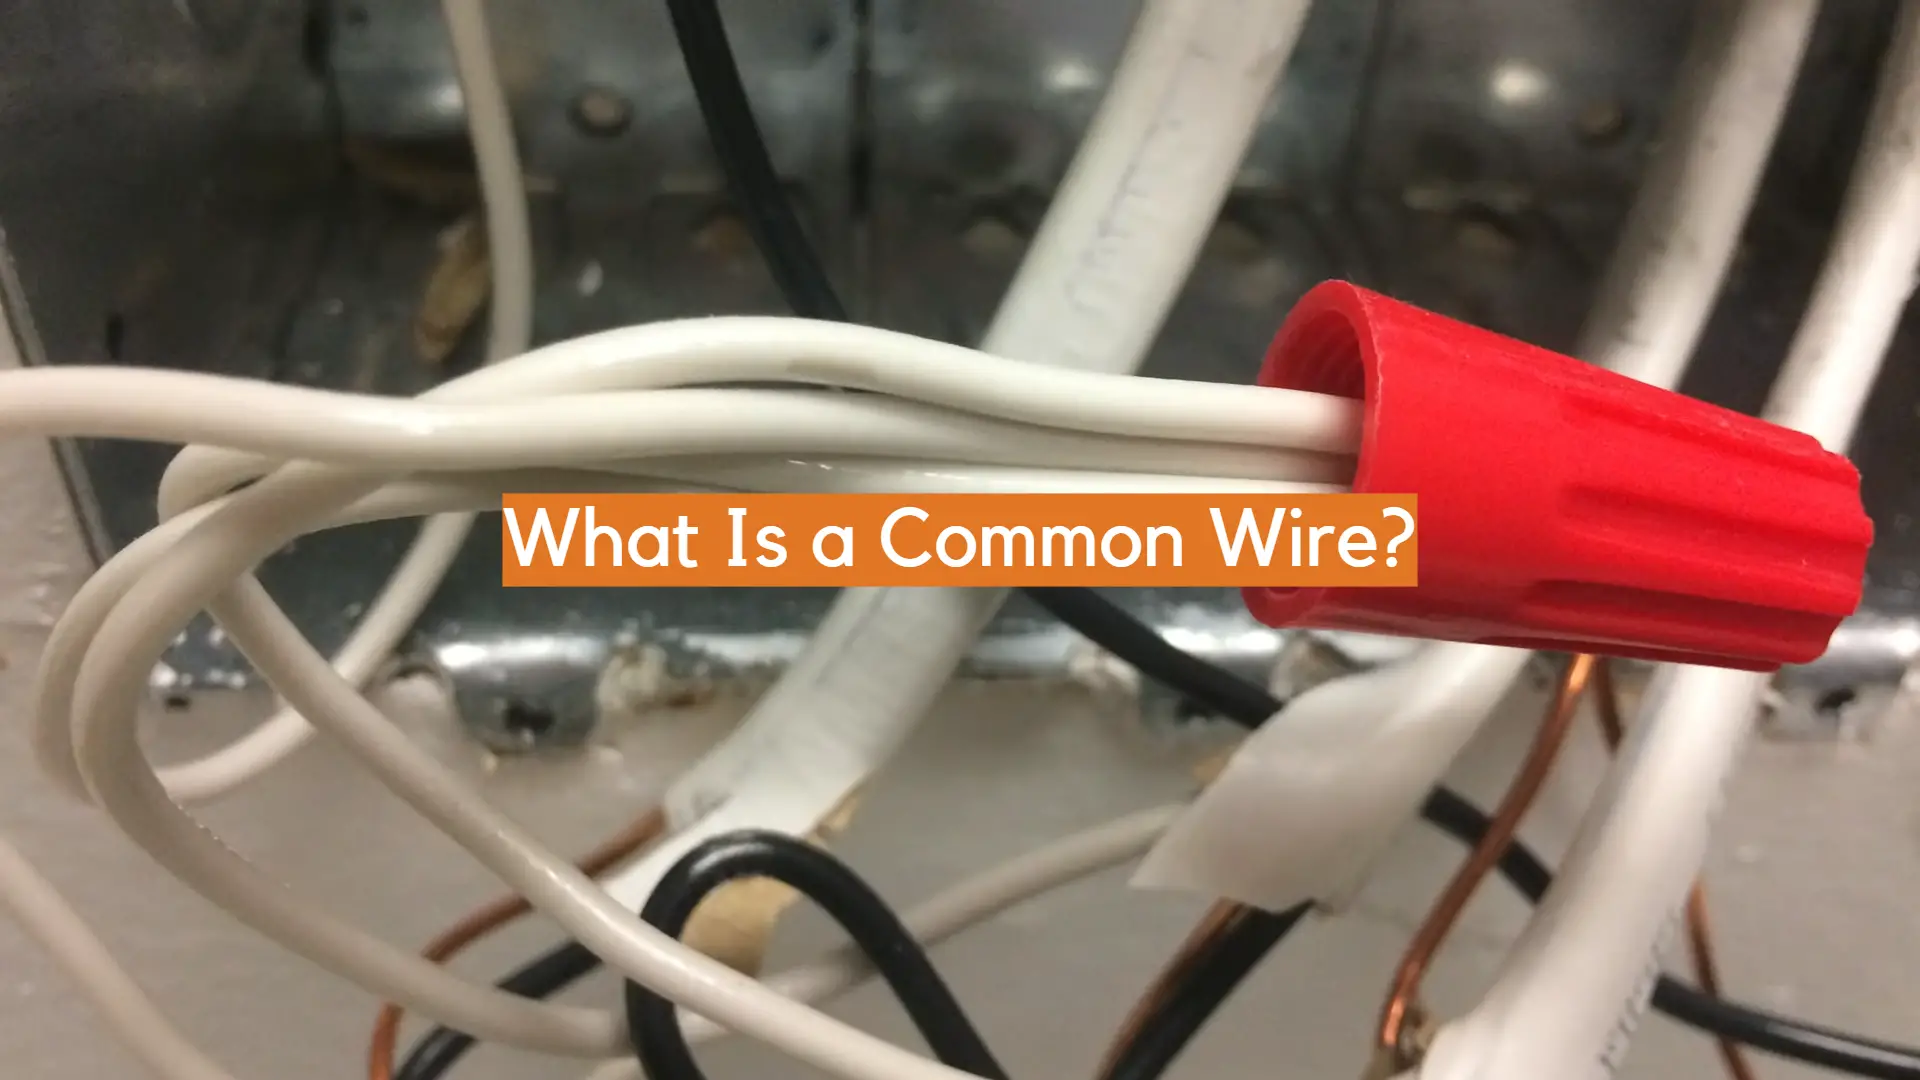 What Is a Common Wire?